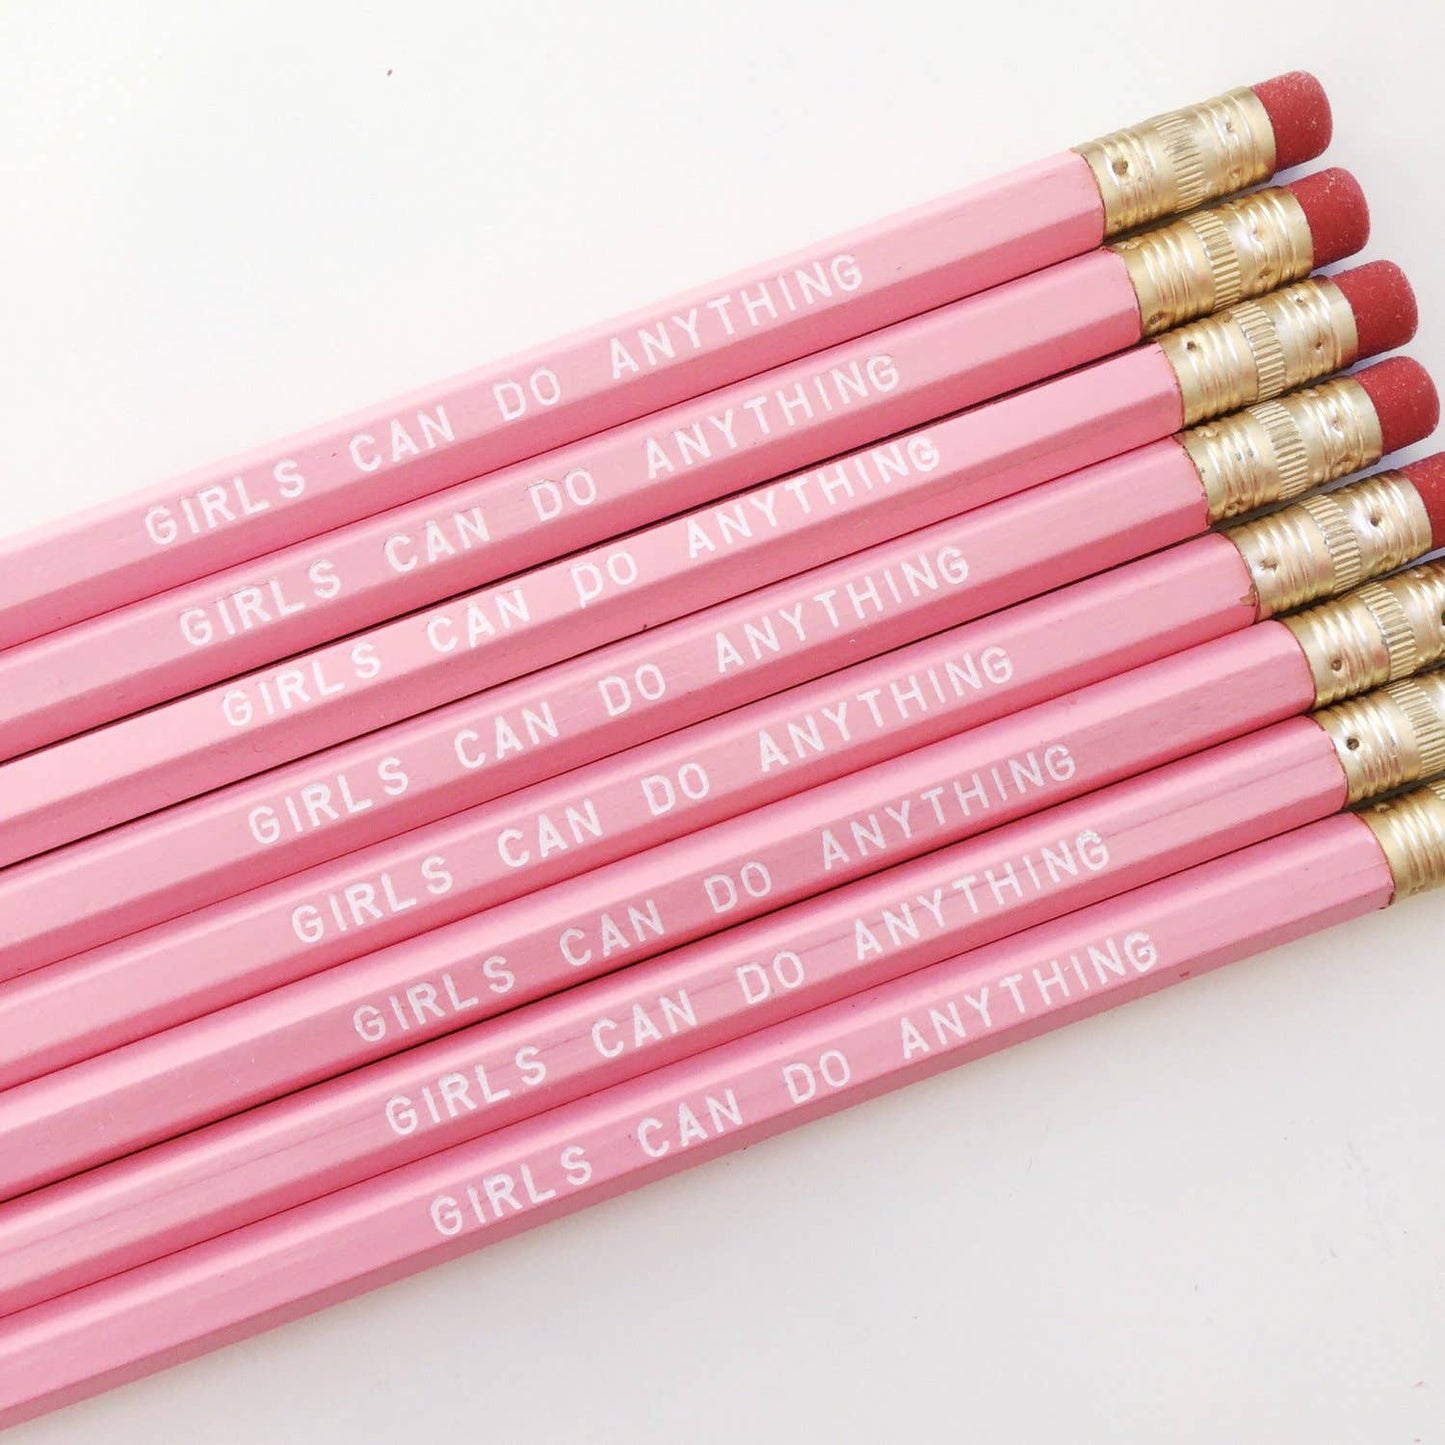 Girls Can Do Anything Pencils - [ash-ling] Booksellers